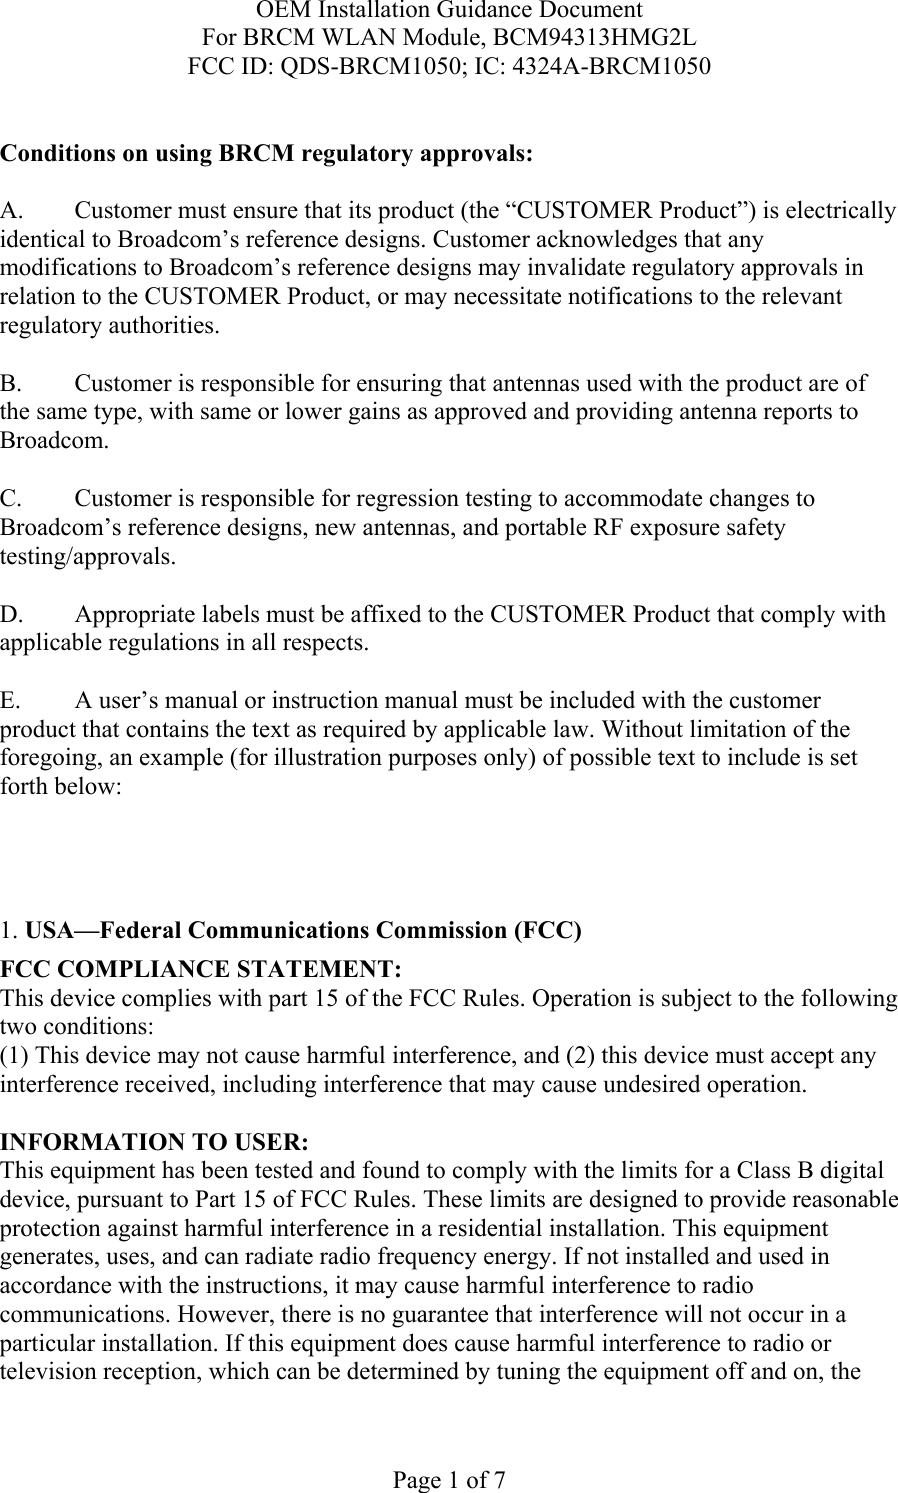 OEM Installation Guidance Document For BRCM WLAN Module, BCM94313HMG2L FCC ID: QDS-BRCM1050; IC: 4324A-BRCM1050  Page 1 of 7  Conditions on using BRCM regulatory approvals:   A.  Customer must ensure that its product (the “CUSTOMER Product”) is electrically identical to Broadcom’s reference designs. Customer acknowledges that any modifications to Broadcom’s reference designs may invalidate regulatory approvals in relation to the CUSTOMER Product, or may necessitate notifications to the relevant regulatory authorities.  B.   Customer is responsible for ensuring that antennas used with the product are of the same type, with same or lower gains as approved and providing antenna reports to Broadcom.  C.   Customer is responsible for regression testing to accommodate changes to Broadcom’s reference designs, new antennas, and portable RF exposure safety testing/approvals.  D.  Appropriate labels must be affixed to the CUSTOMER Product that comply with applicable regulations in all respects.    E.  A user’s manual or instruction manual must be included with the customer product that contains the text as required by applicable law. Without limitation of the foregoing, an example (for illustration purposes only) of possible text to include is set forth below:      1. USA—Federal Communications Commission (FCC) FCC COMPLIANCE STATEMENT: This device complies with part 15 of the FCC Rules. Operation is subject to the following two conditions: (1) This device may not cause harmful interference, and (2) this device must accept any interference received, including interference that may cause undesired operation.  INFORMATION TO USER: This equipment has been tested and found to comply with the limits for a Class B digital device, pursuant to Part 15 of FCC Rules. These limits are designed to provide reasonable protection against harmful interference in a residential installation. This equipment generates, uses, and can radiate radio frequency energy. If not installed and used in accordance with the instructions, it may cause harmful interference to radio communications. However, there is no guarantee that interference will not occur in a particular installation. If this equipment does cause harmful interference to radio or television reception, which can be determined by tuning the equipment off and on, the 